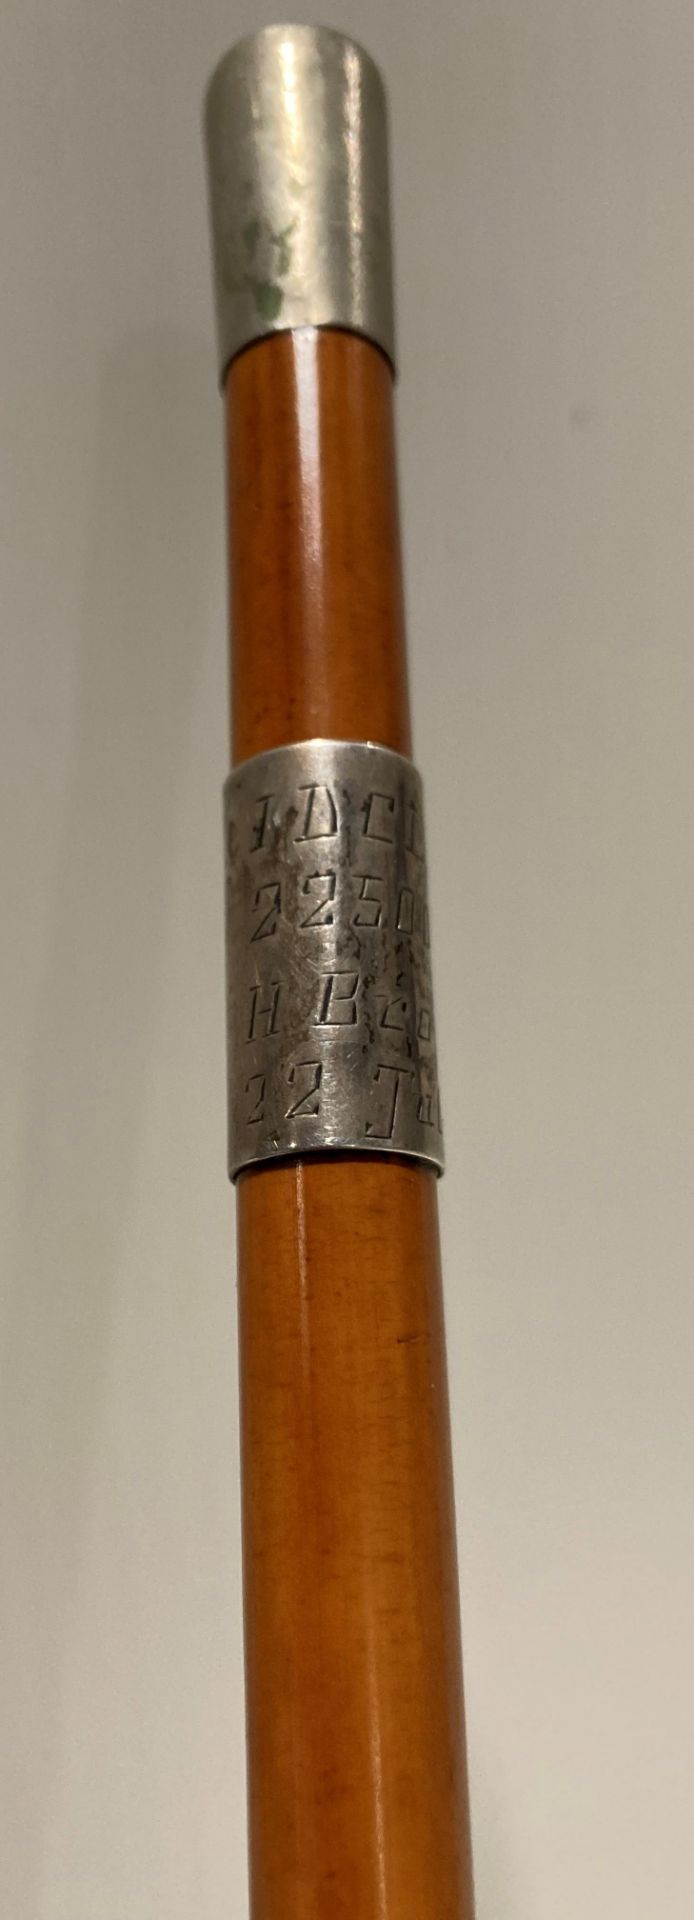 Light brown swagger military stick with silver collar and inscription of H.DCLI 22500 466 PTE H. - Image 2 of 3